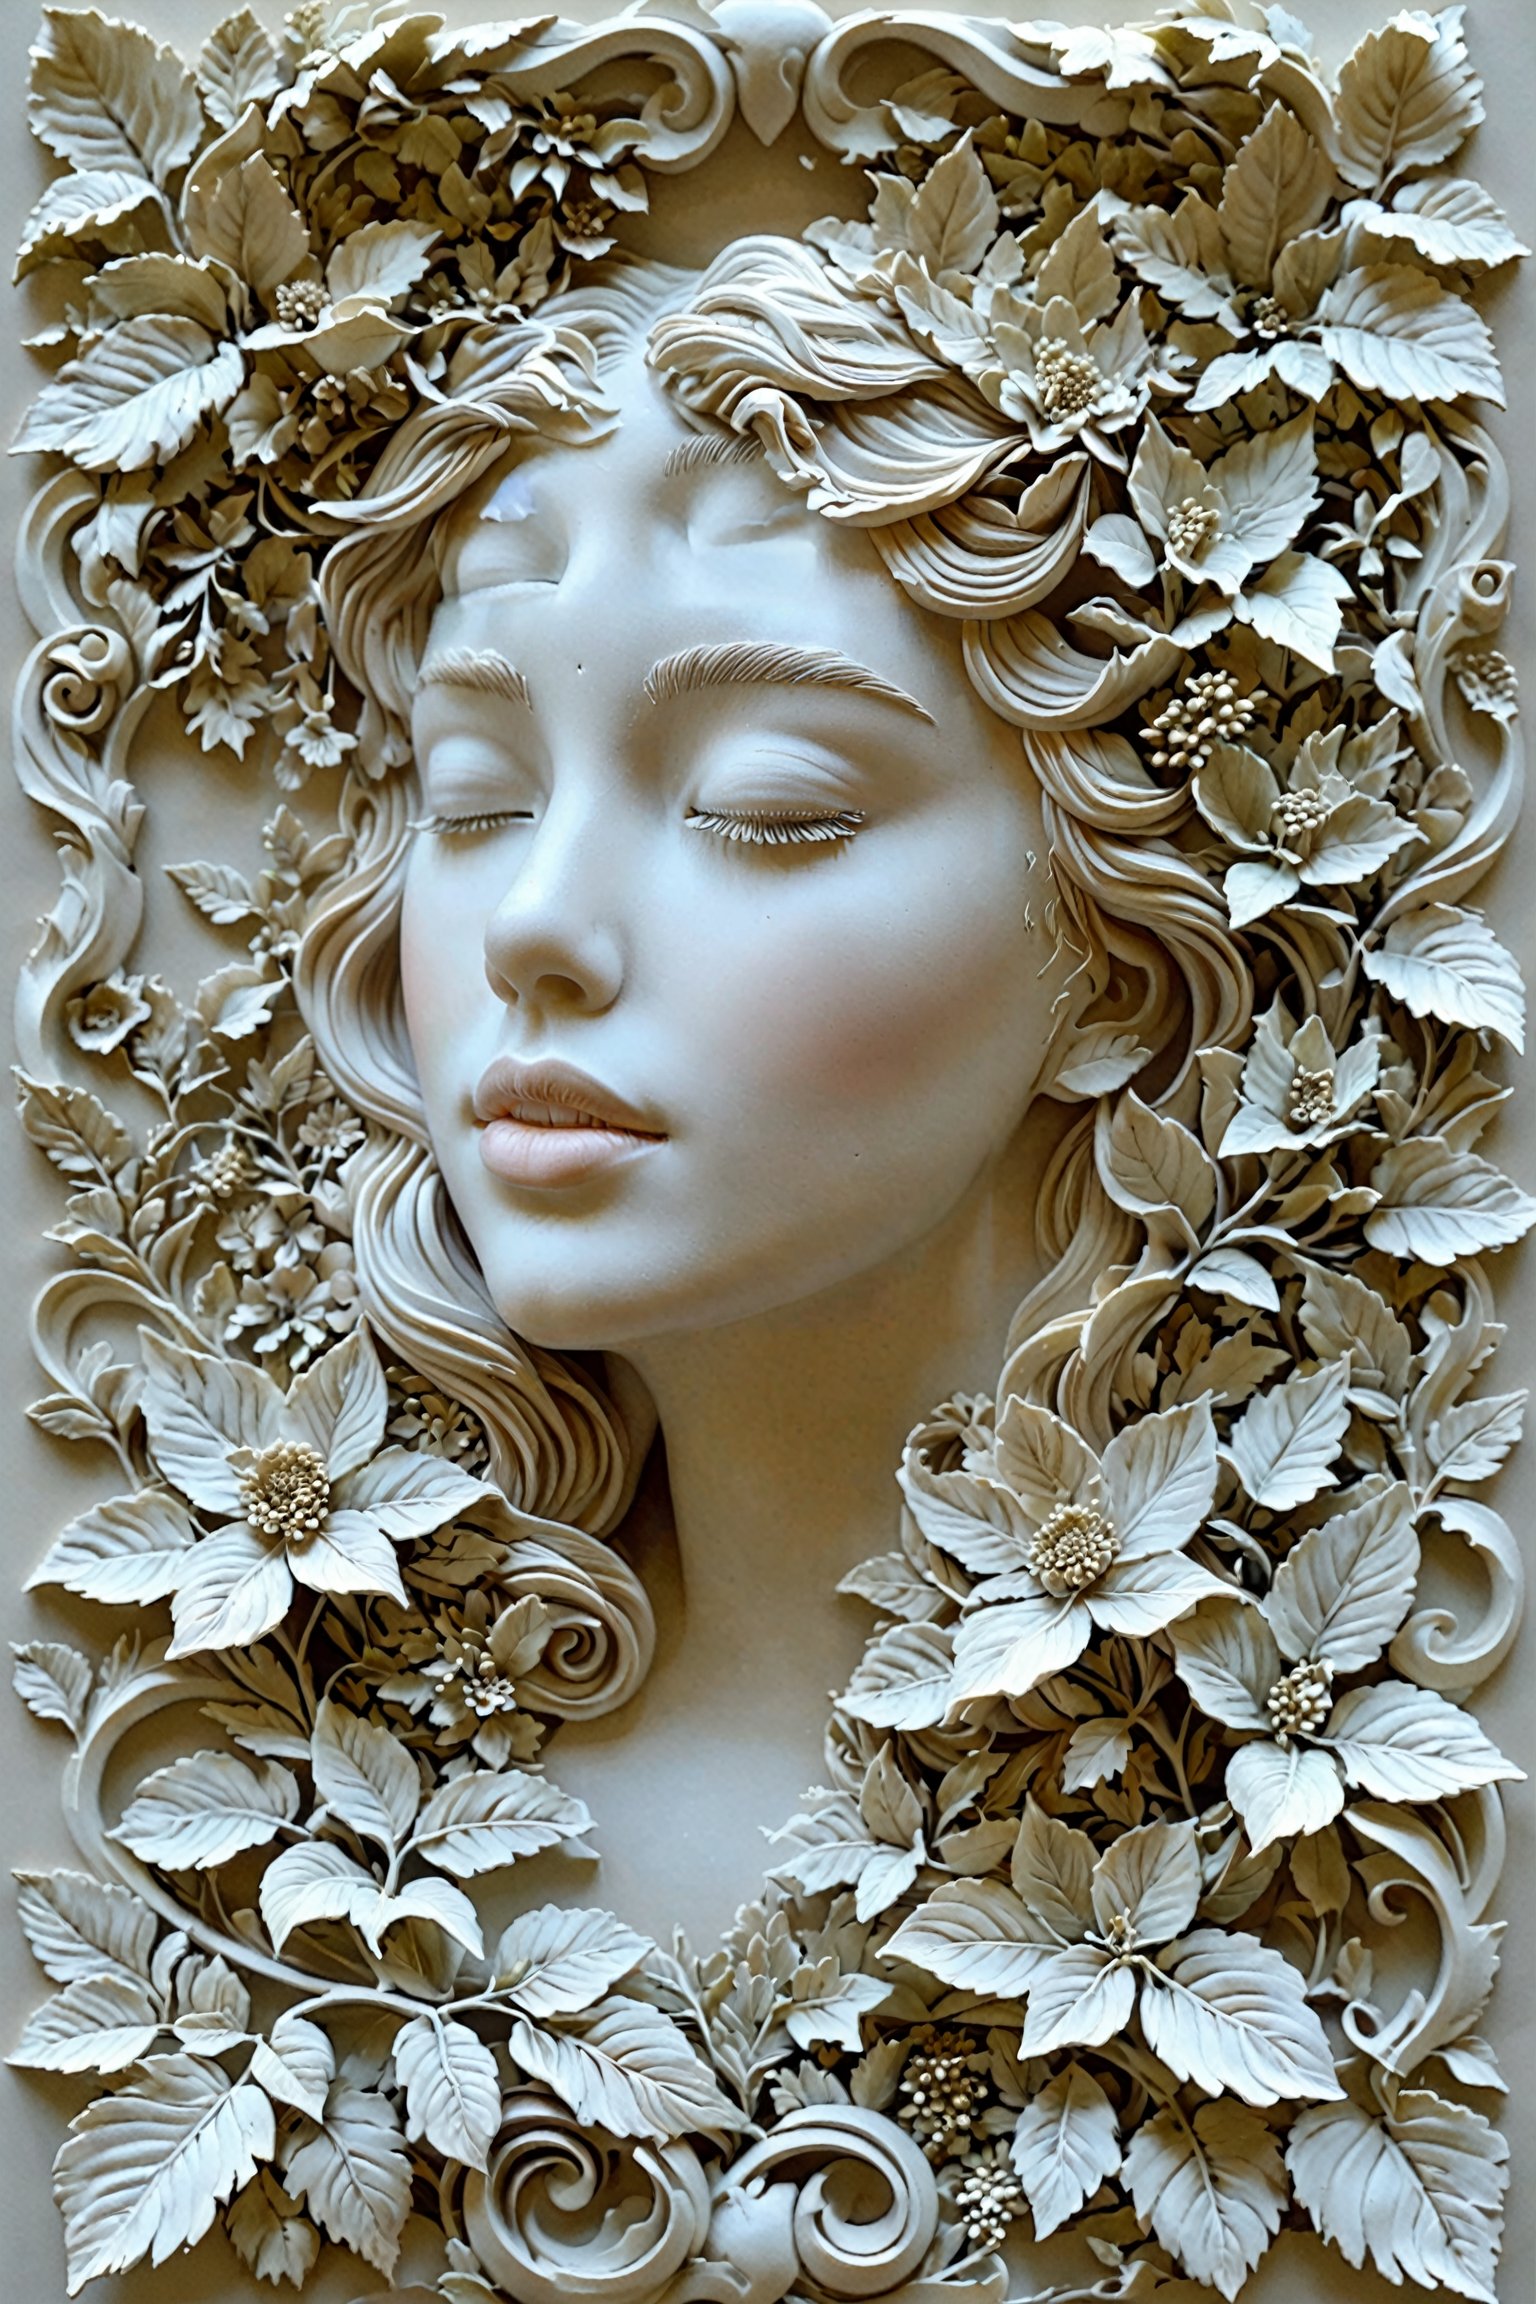 A detailed and intricate sculpture of a woman's face, surrounded by an elaborate arrangement of flowers, leaves, and other natural elements. The woman's face is serene, with her eyes closed and lips slightly parted. Her hair flows seamlessly into the surrounding flora, blending with the elements. Birds can be seen flying around her, and at the bottom, there's a miniature landscape with houses, trees, and a body of water. The entire composition is in a monochromatic palette, predominantly in shades of white, giving it a dreamy and ethereal feel.